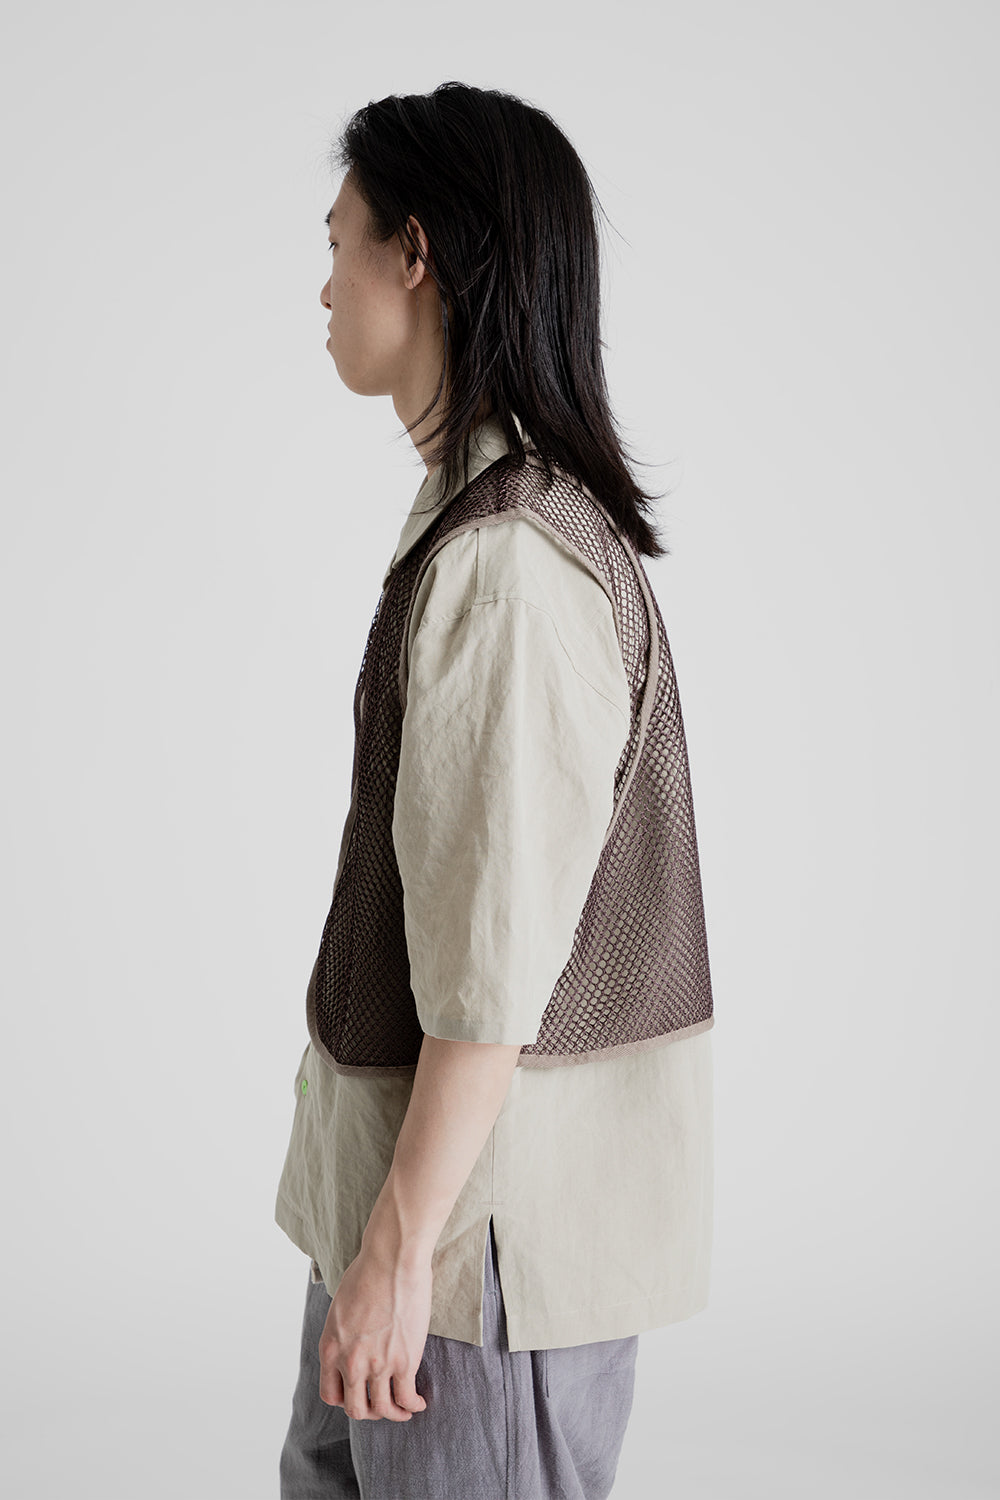 S.K Manor Hill Trapper Vest in Brown Mesh Poly